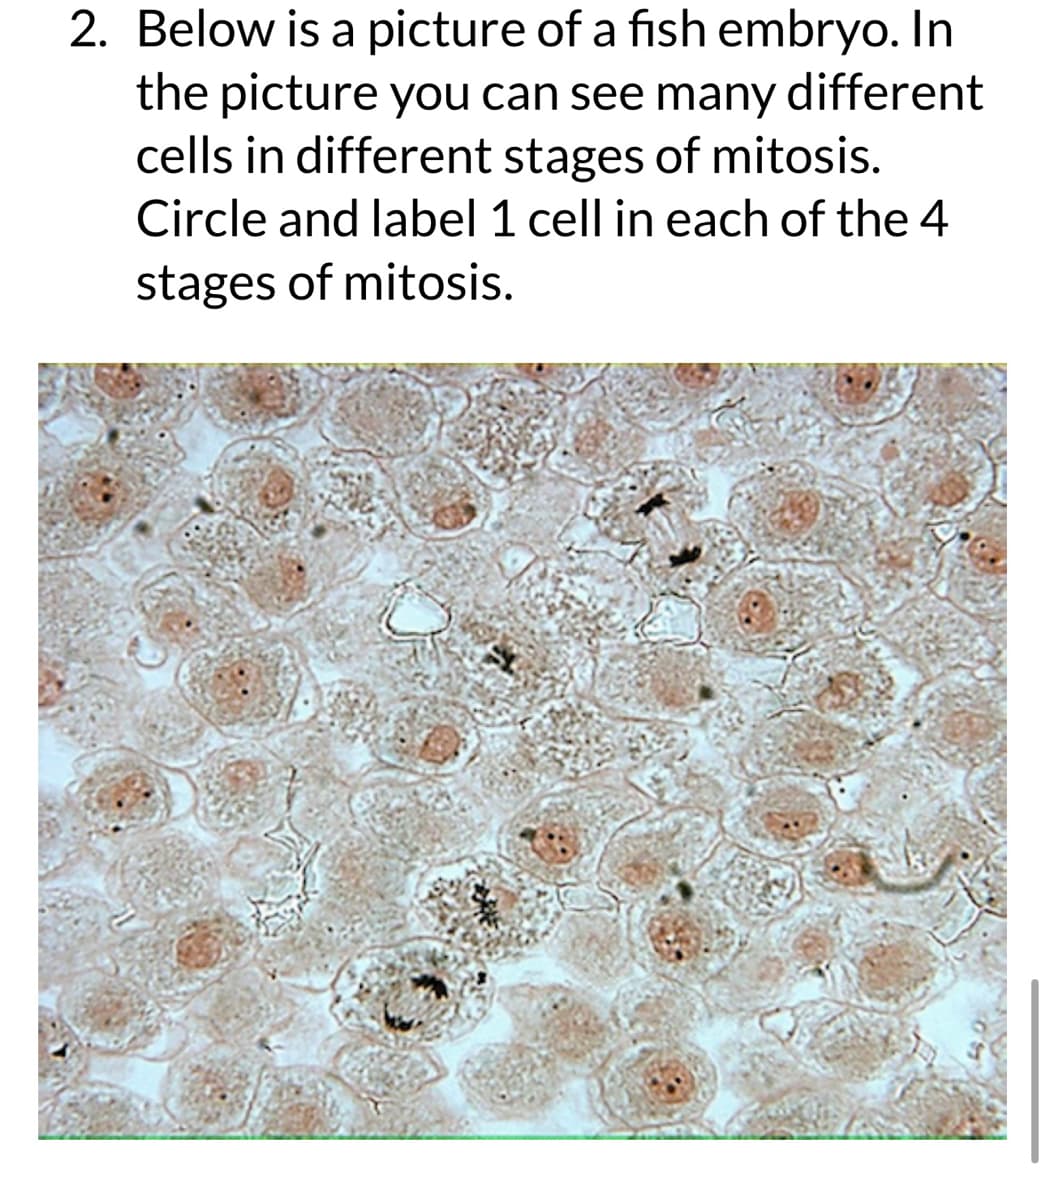 2. Below is a picture of a fish embryo. In
the picture you can see many different
cells in different stages of mitosis.
Circle and label 1 cell in each of the 4
stages of mitosis.